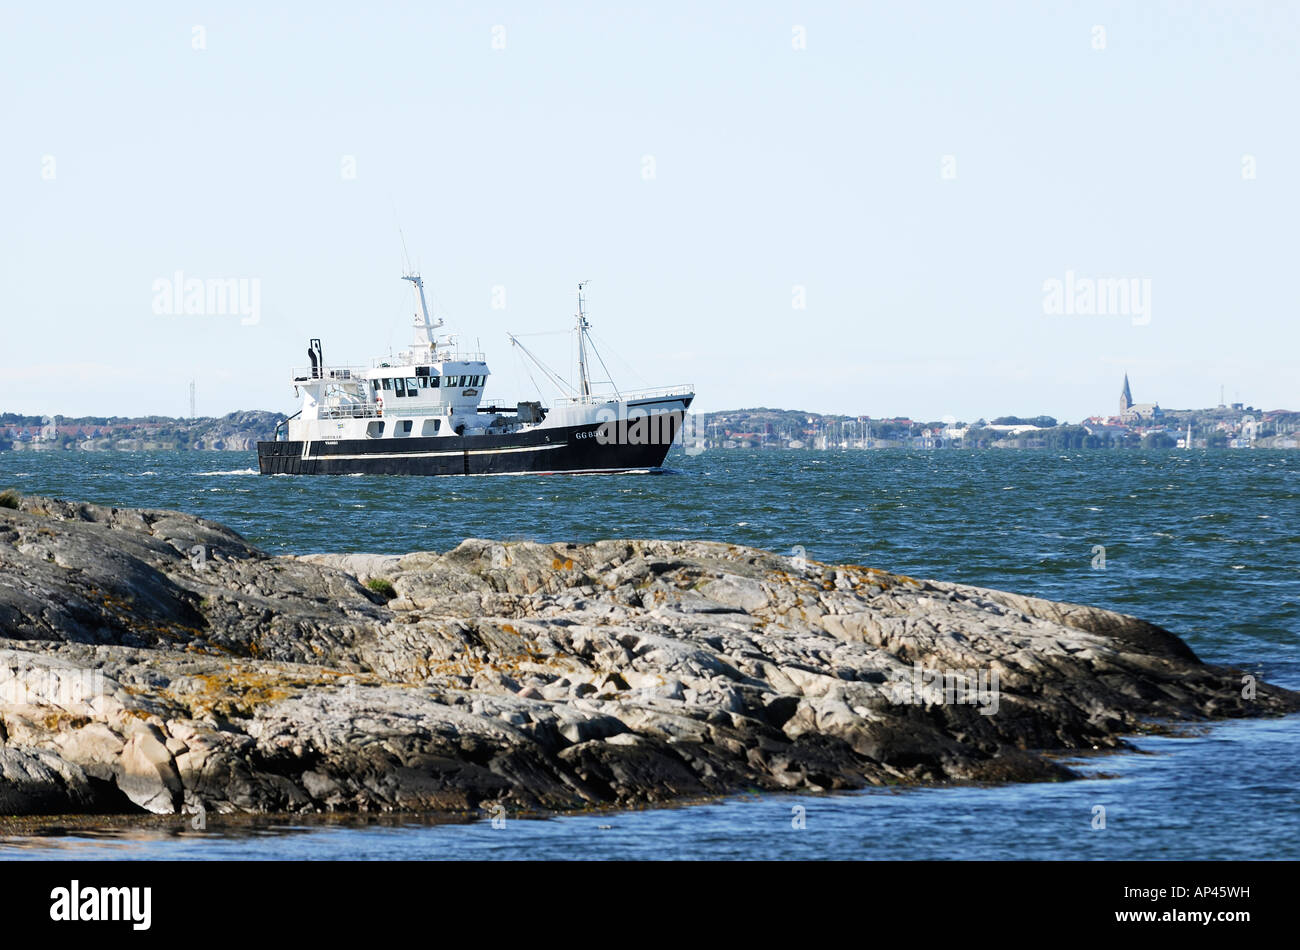 Fishing boat on water in Sweden Stock Photo